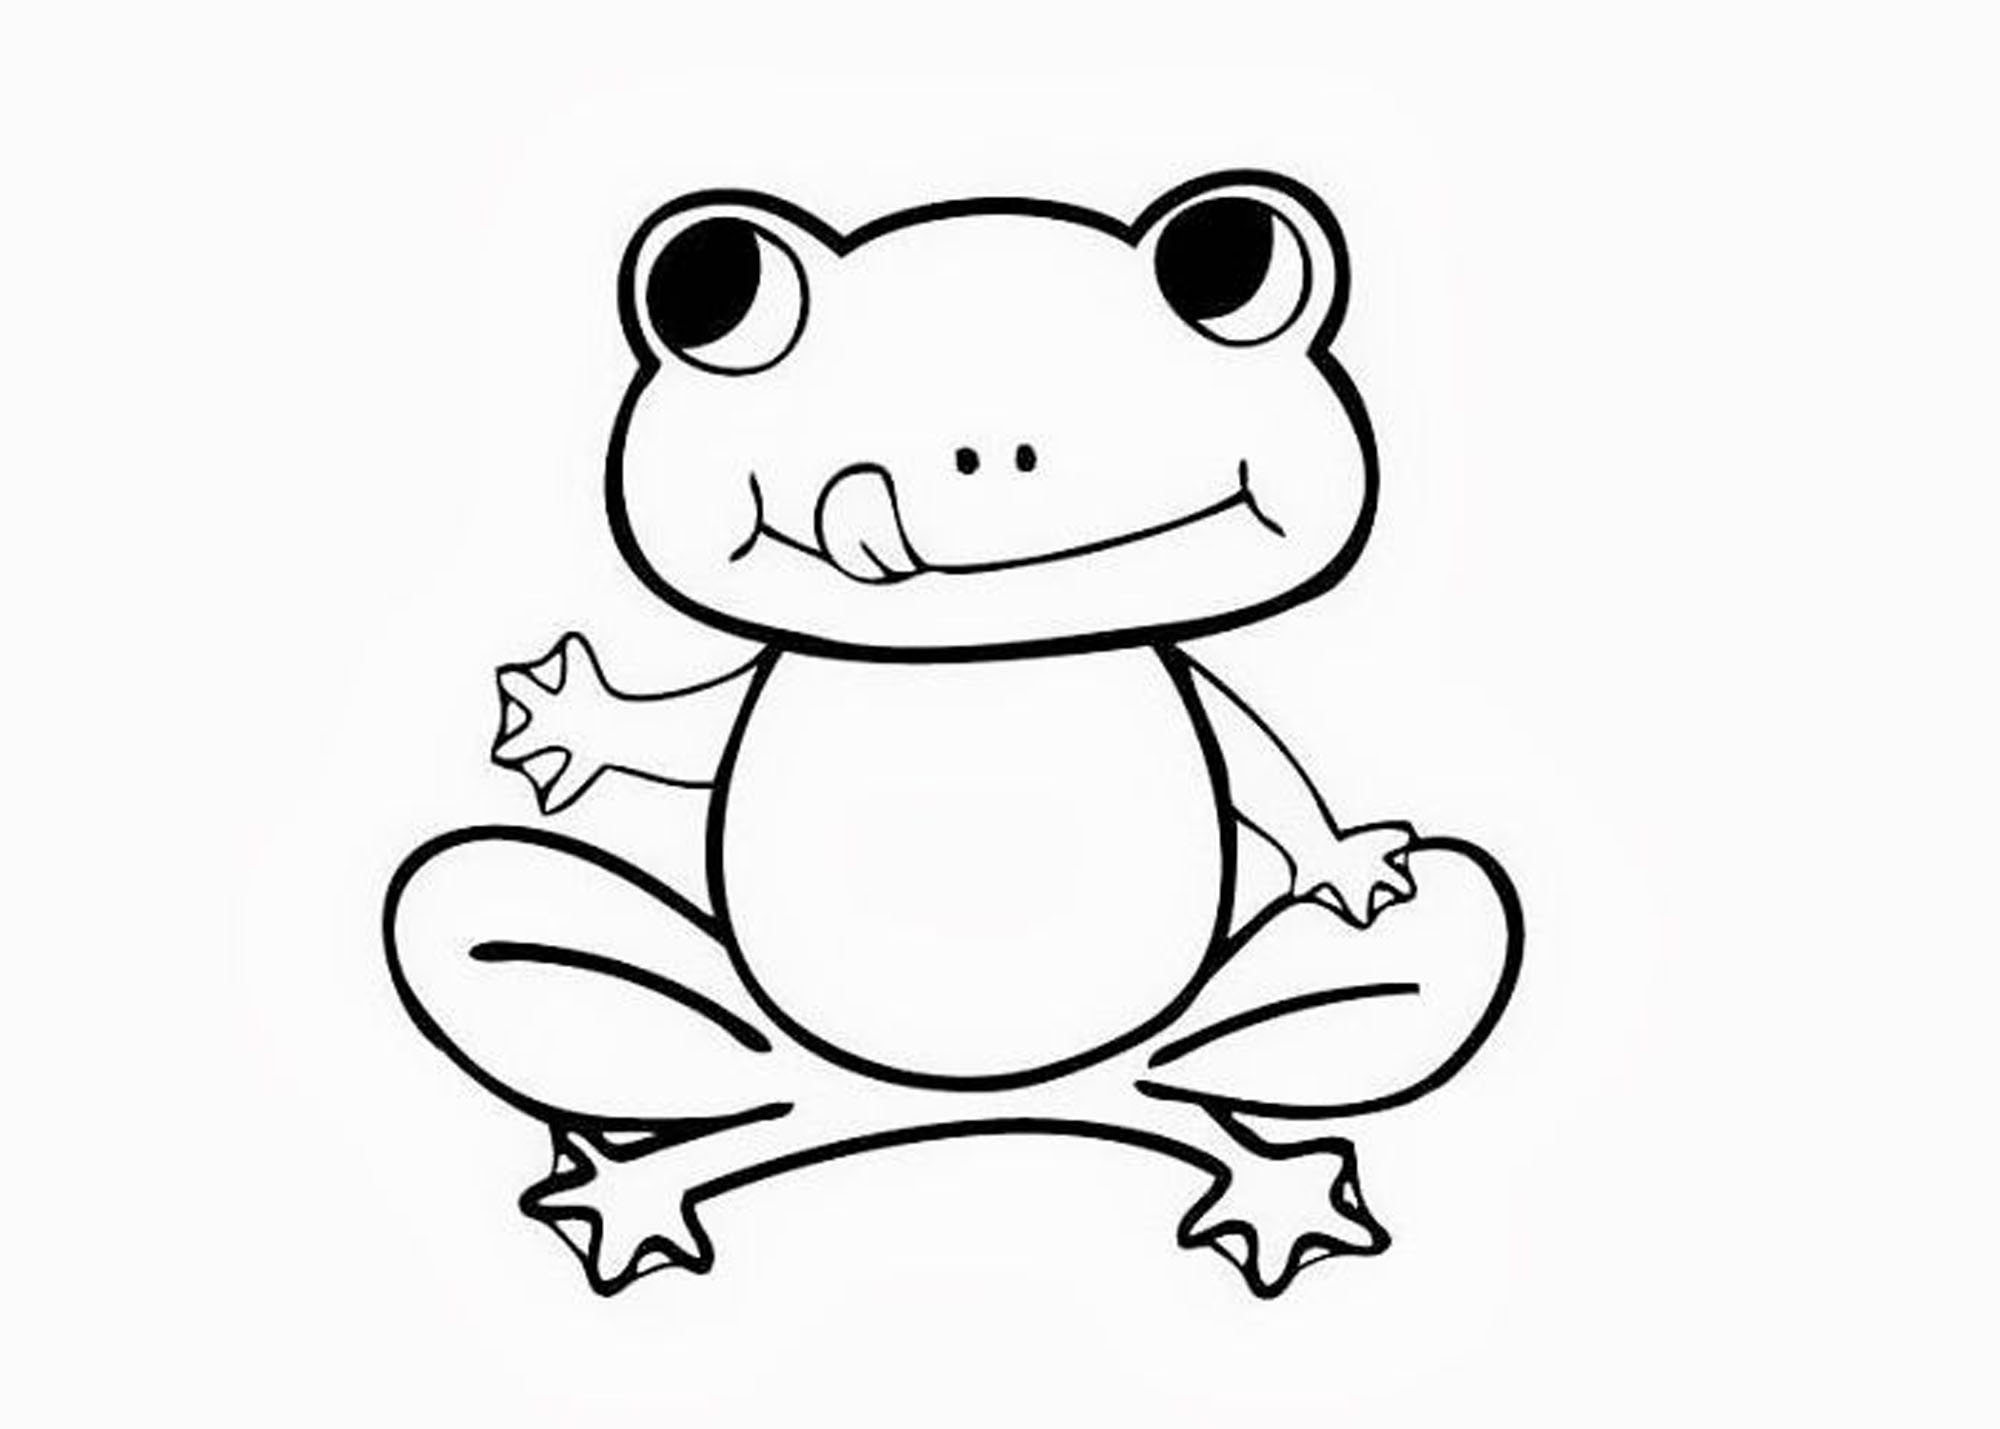 Frog Coloring Pages For Kids
 Print & Download Frog Coloring Pages Theme for Kids